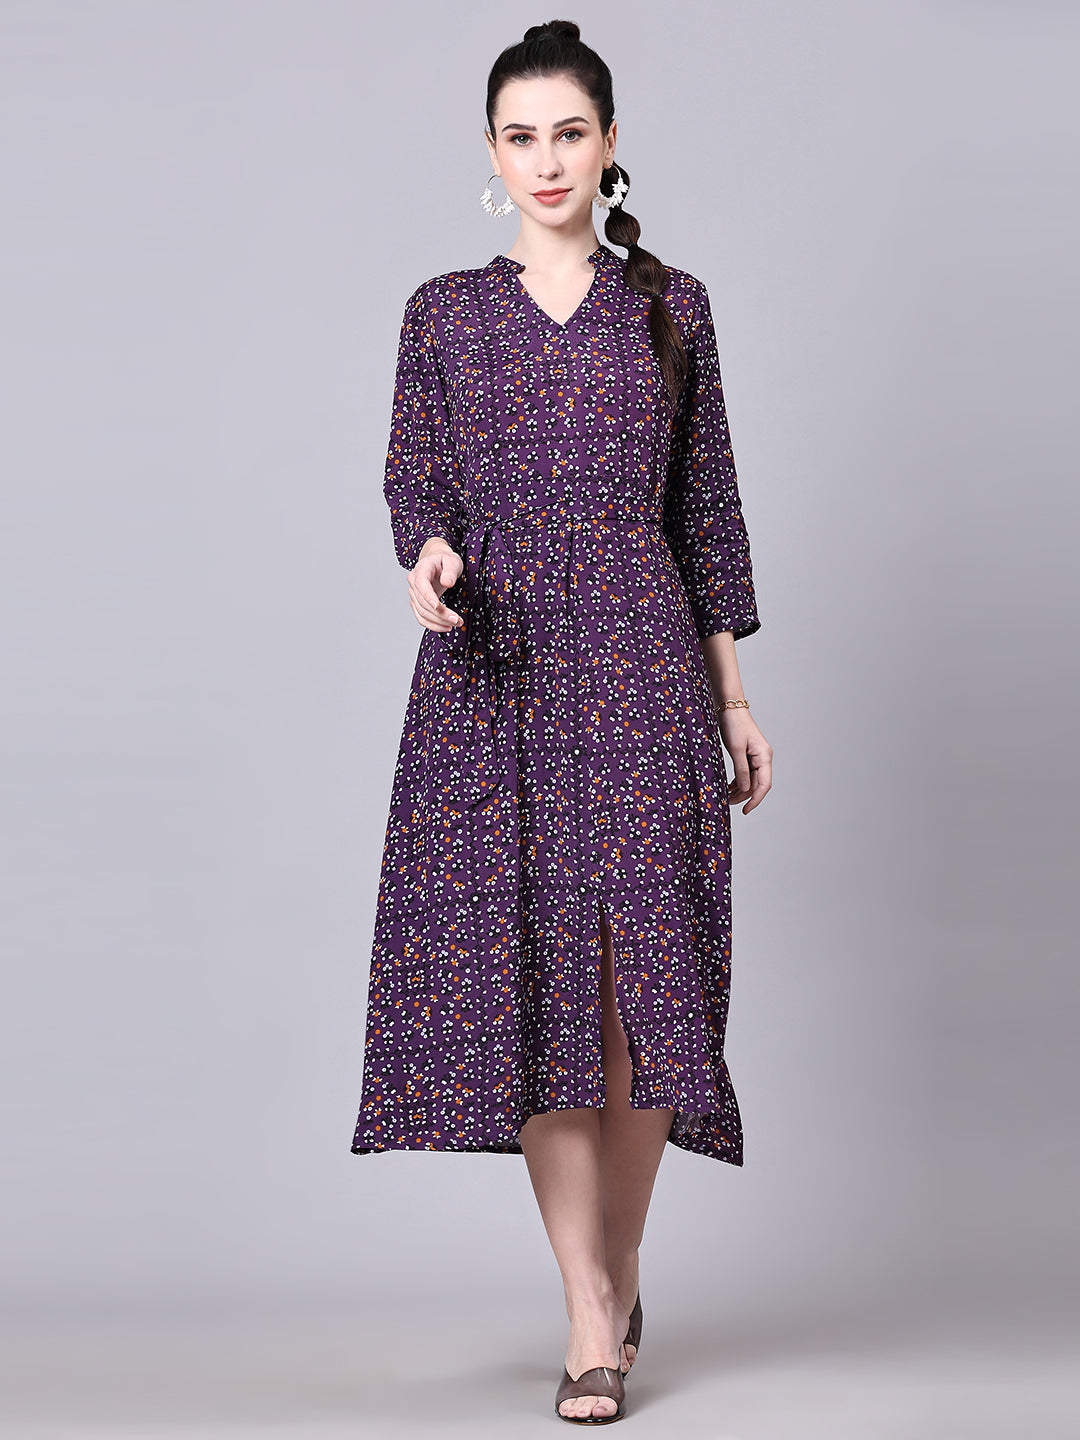 Pomegal Voilet Fit and Flare Printed Midi Dress